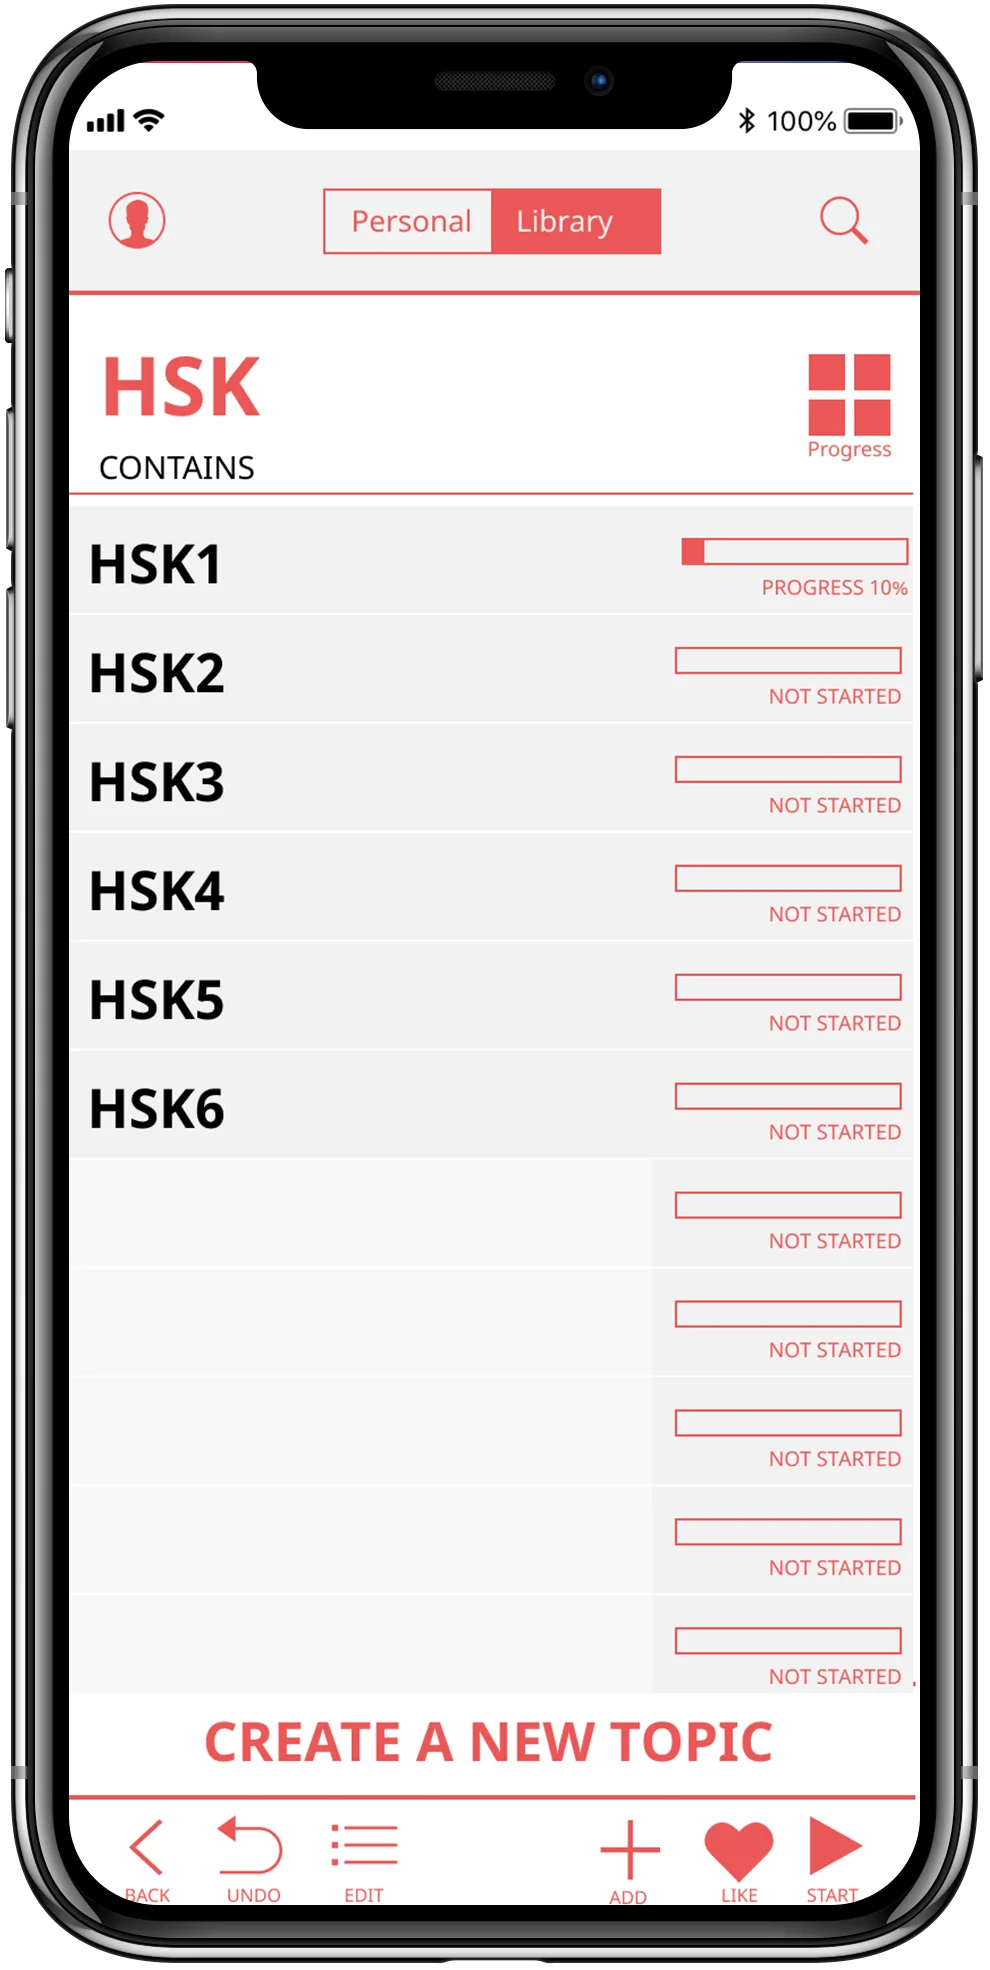 List of predefined topics within HSK.